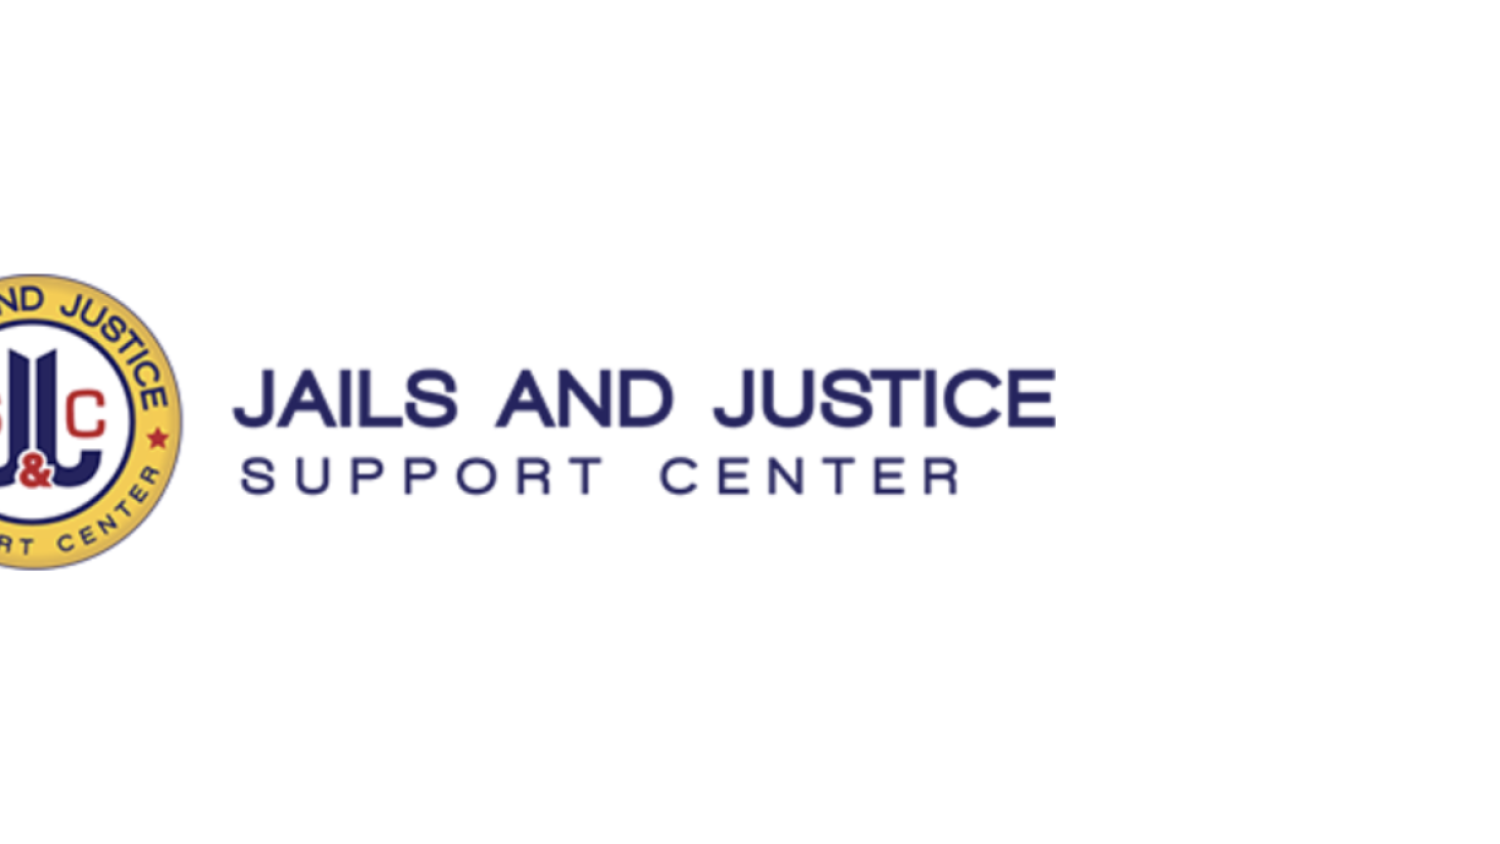 Blue text reading "Jails and Justice Support Center" next to a logo reading "Jails and Justice Support Center."